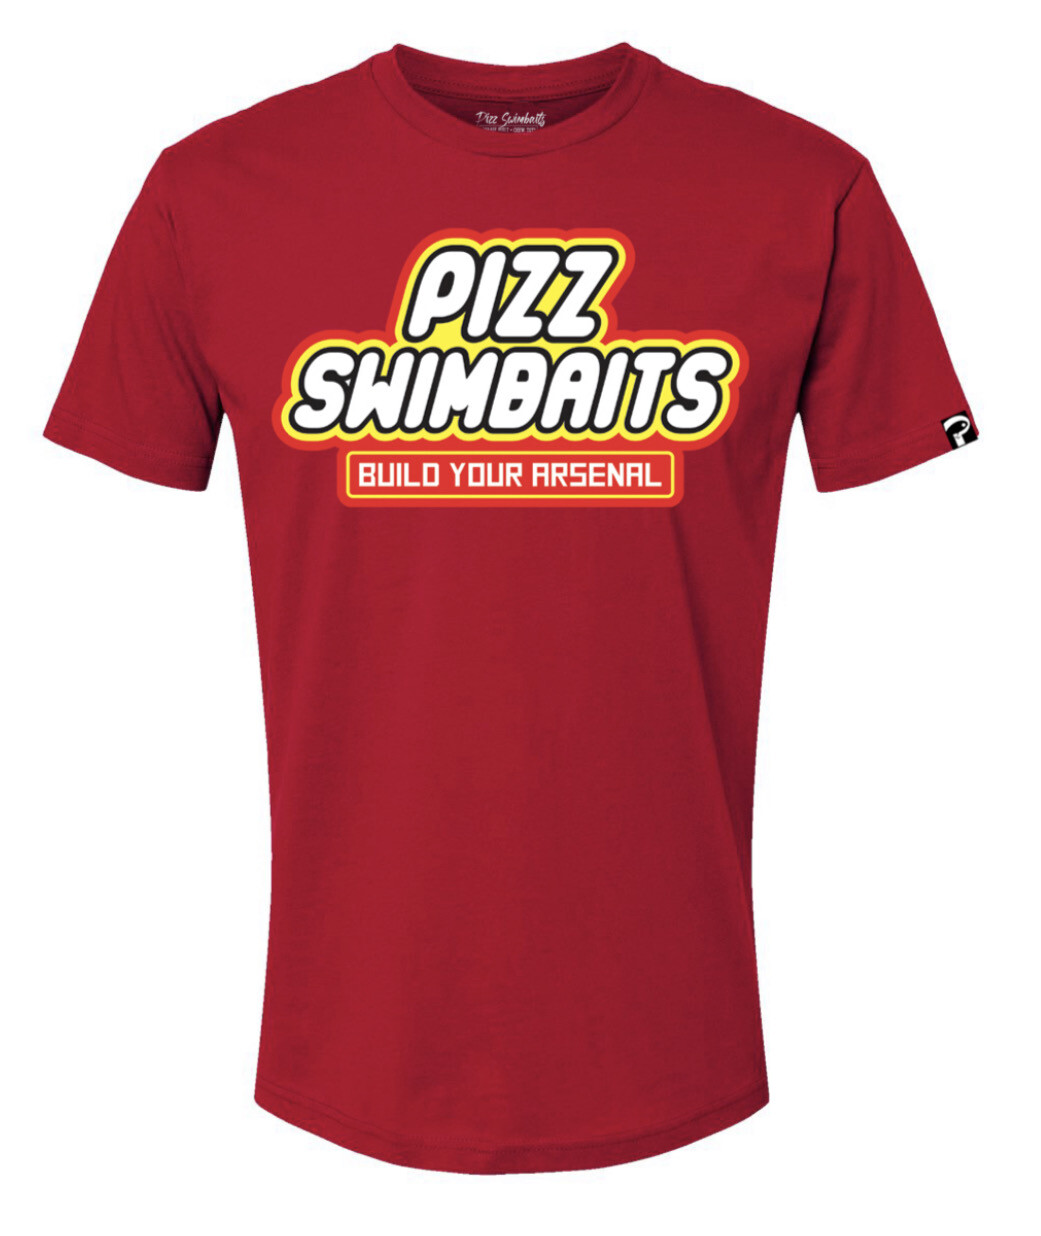 Pizz Swimbaits - YOUTH SS T Shirt - Build Your Arsenal